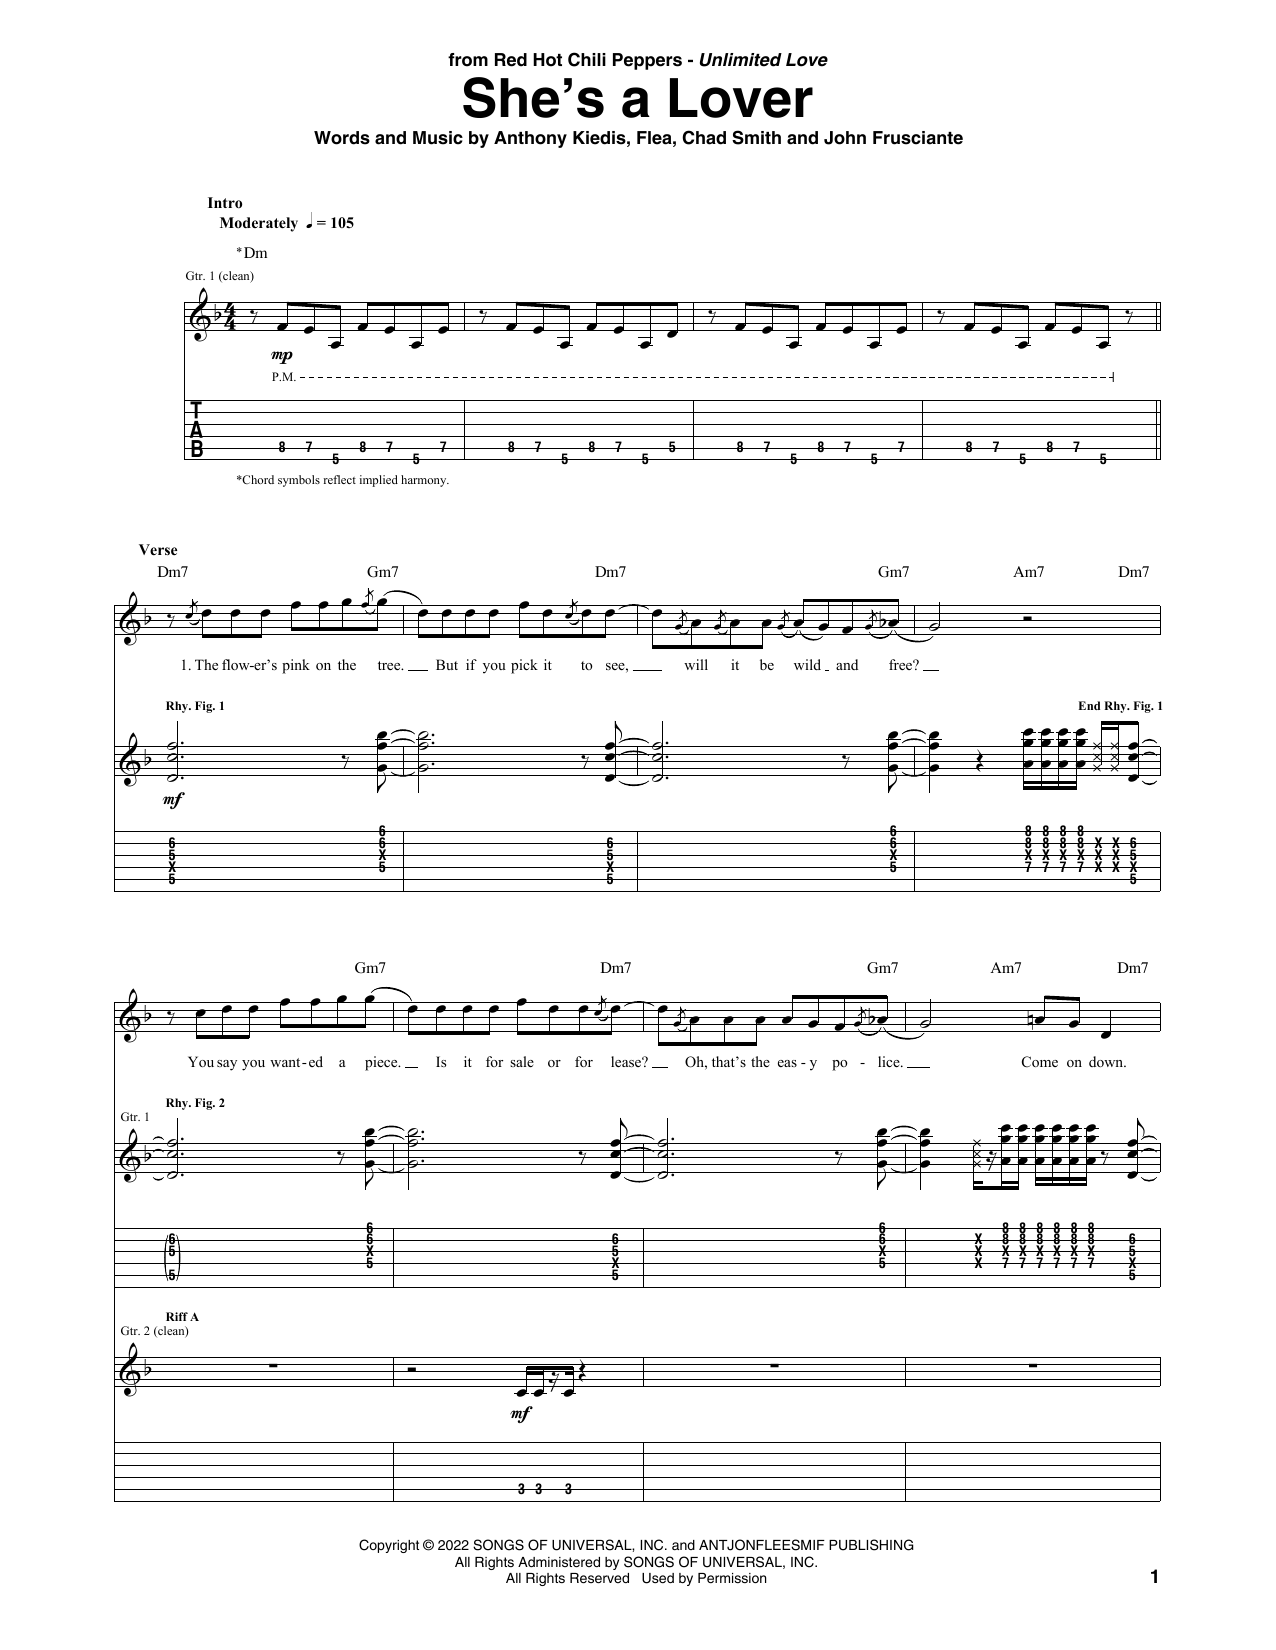 Download Red Hot Chili Peppers She's A Lover Sheet Music